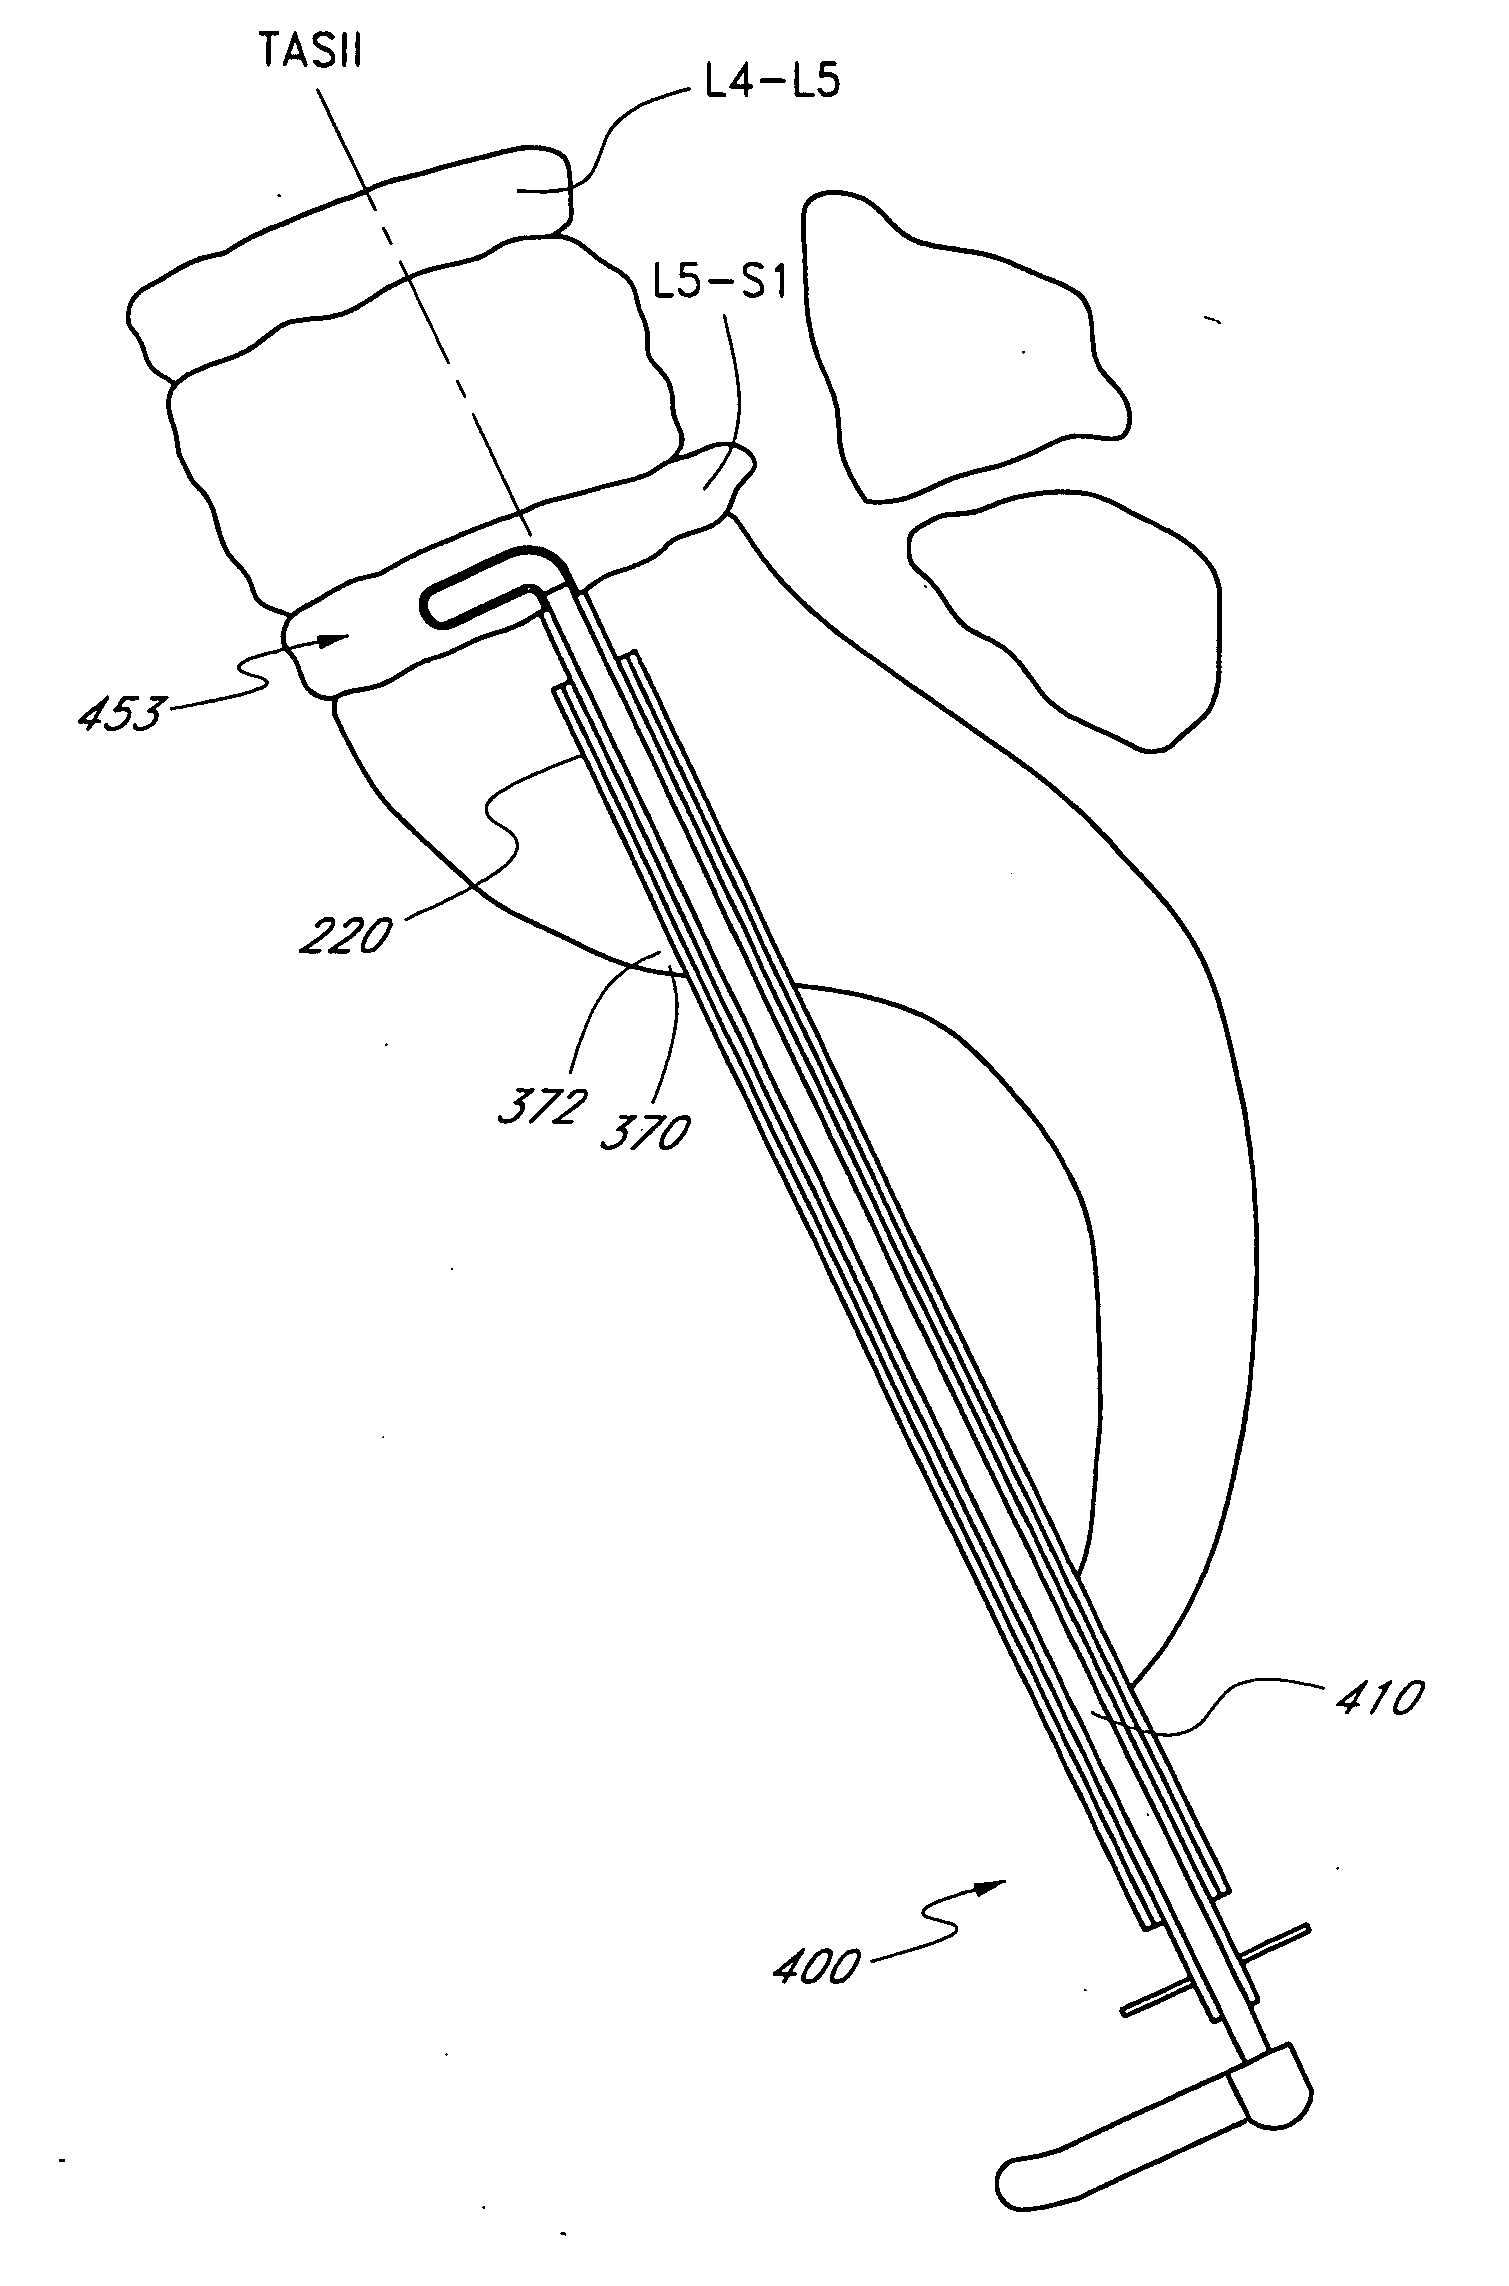 Spinal nucleus extraction tool